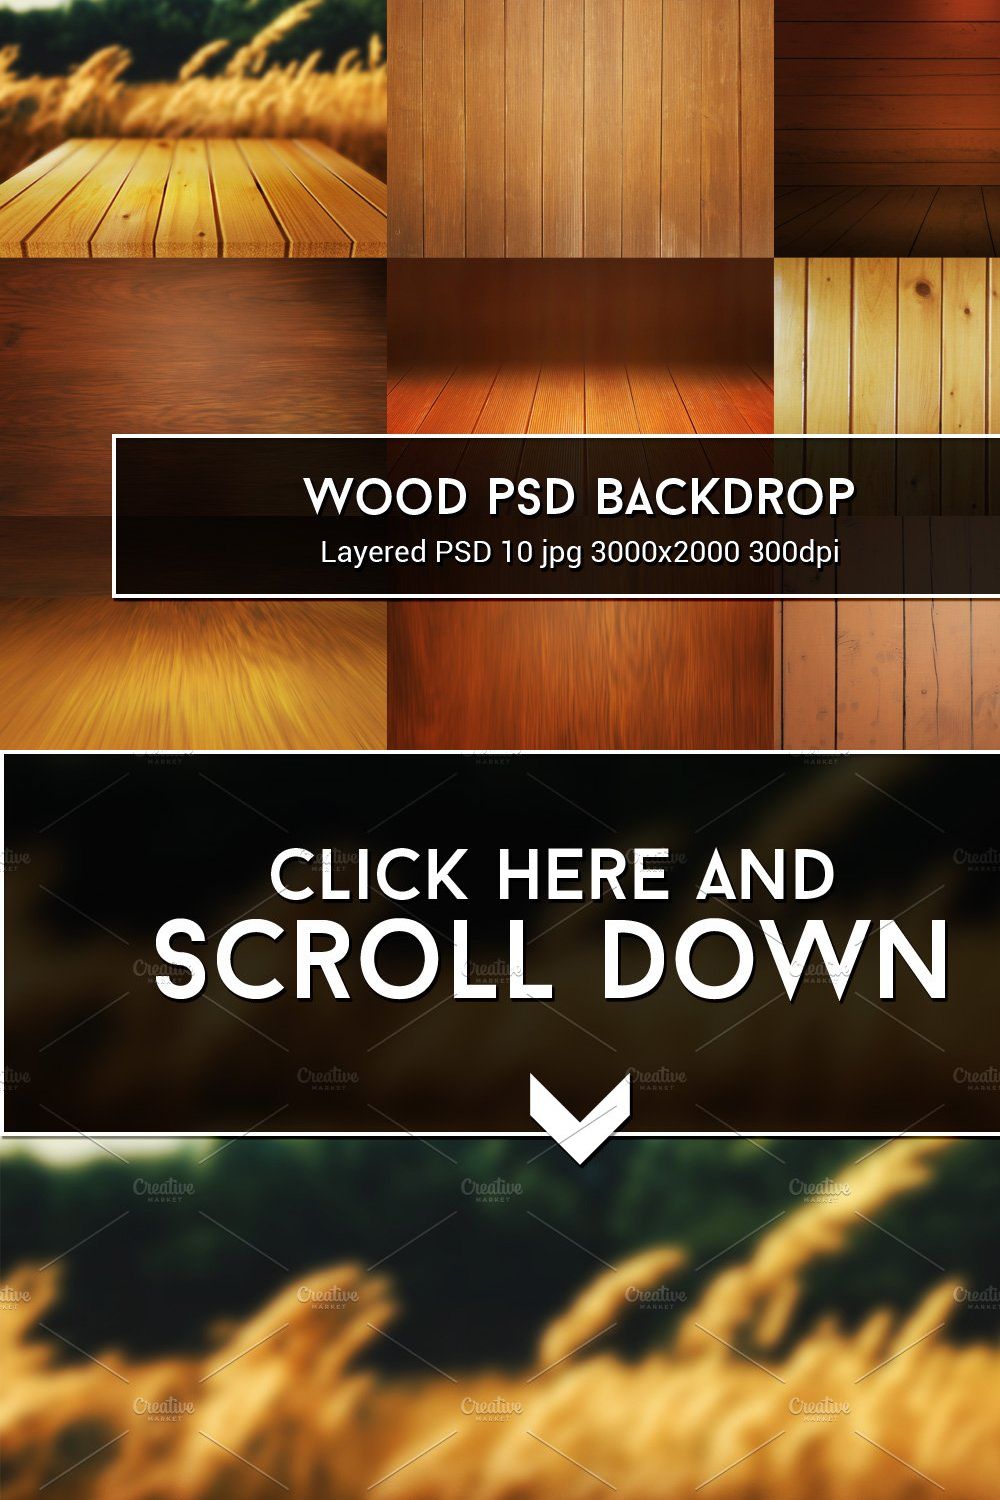 Wood PSD Backdrop pinterest preview image.